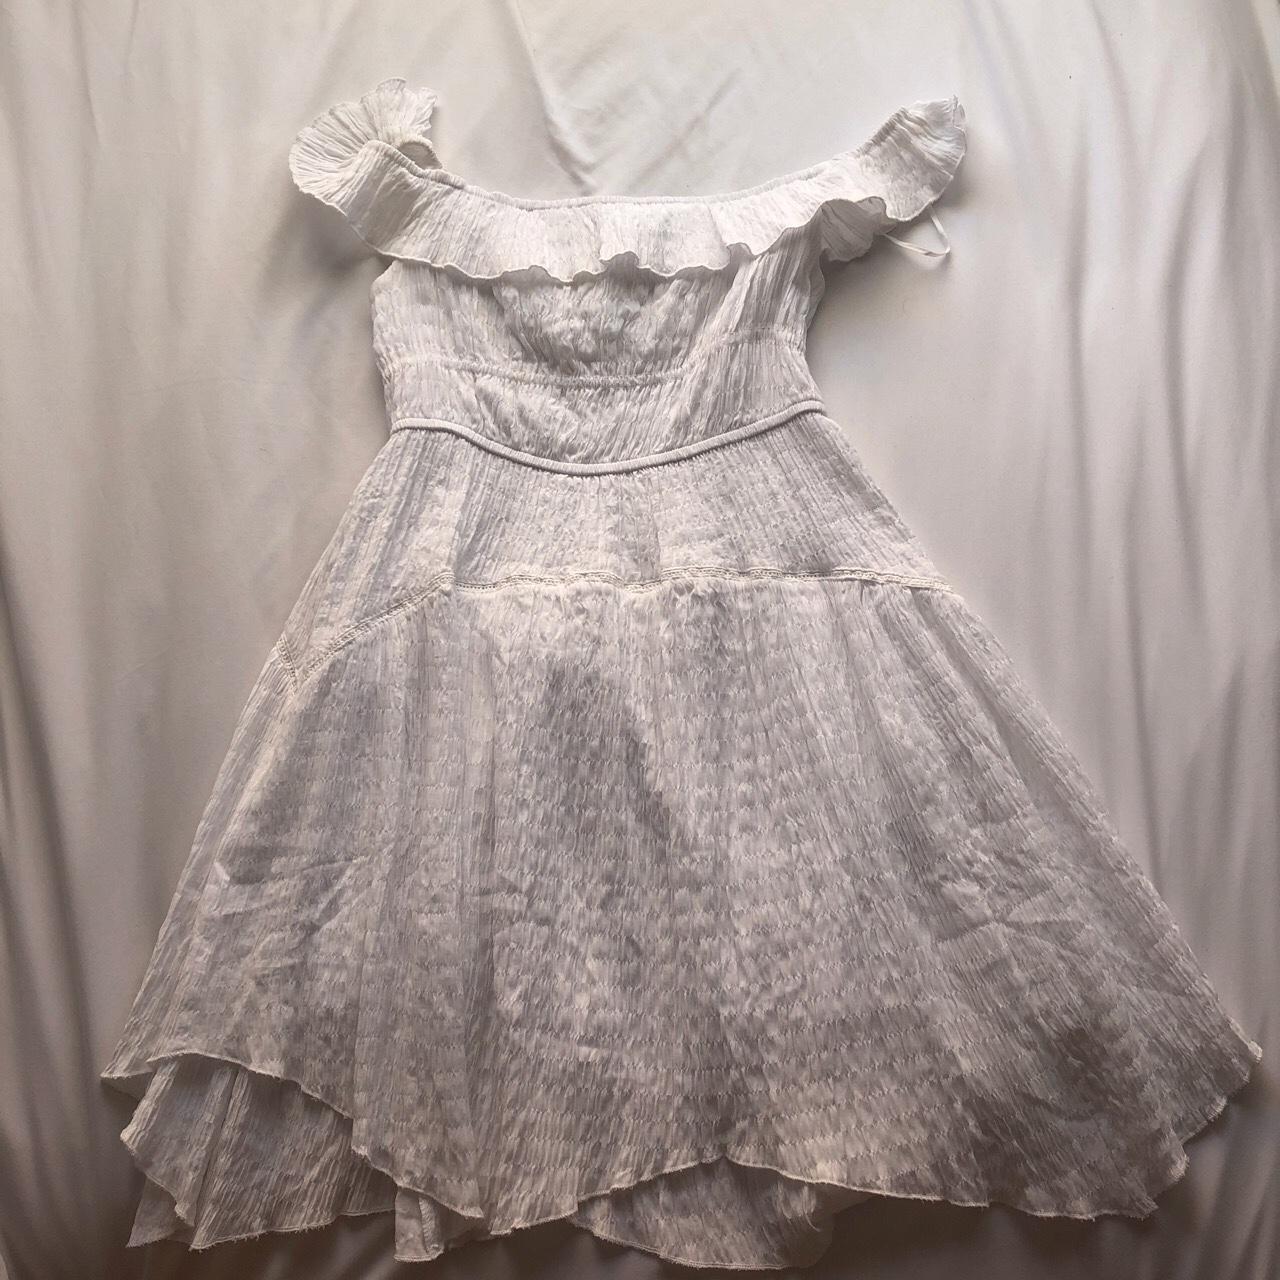 white dress with tags still attached - Depop